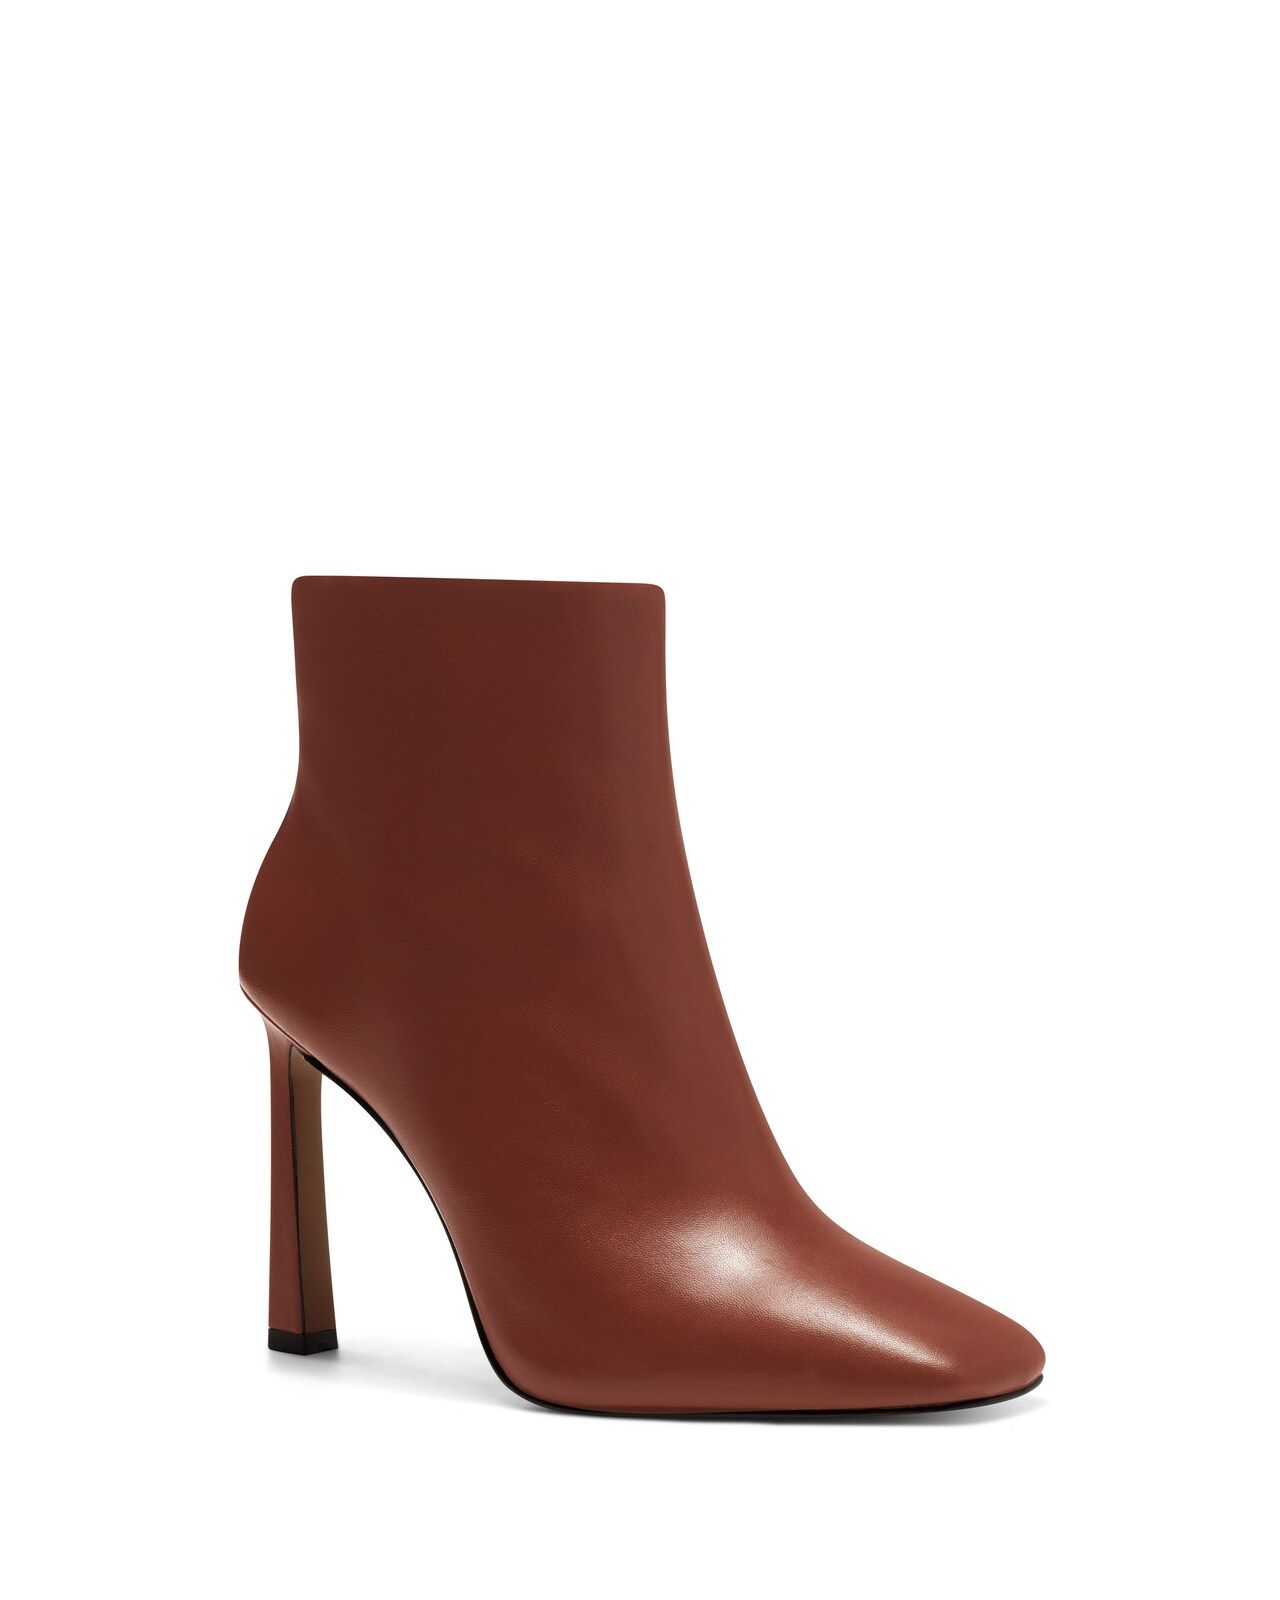 Taileen Heeled Bootie | Vince Camuto